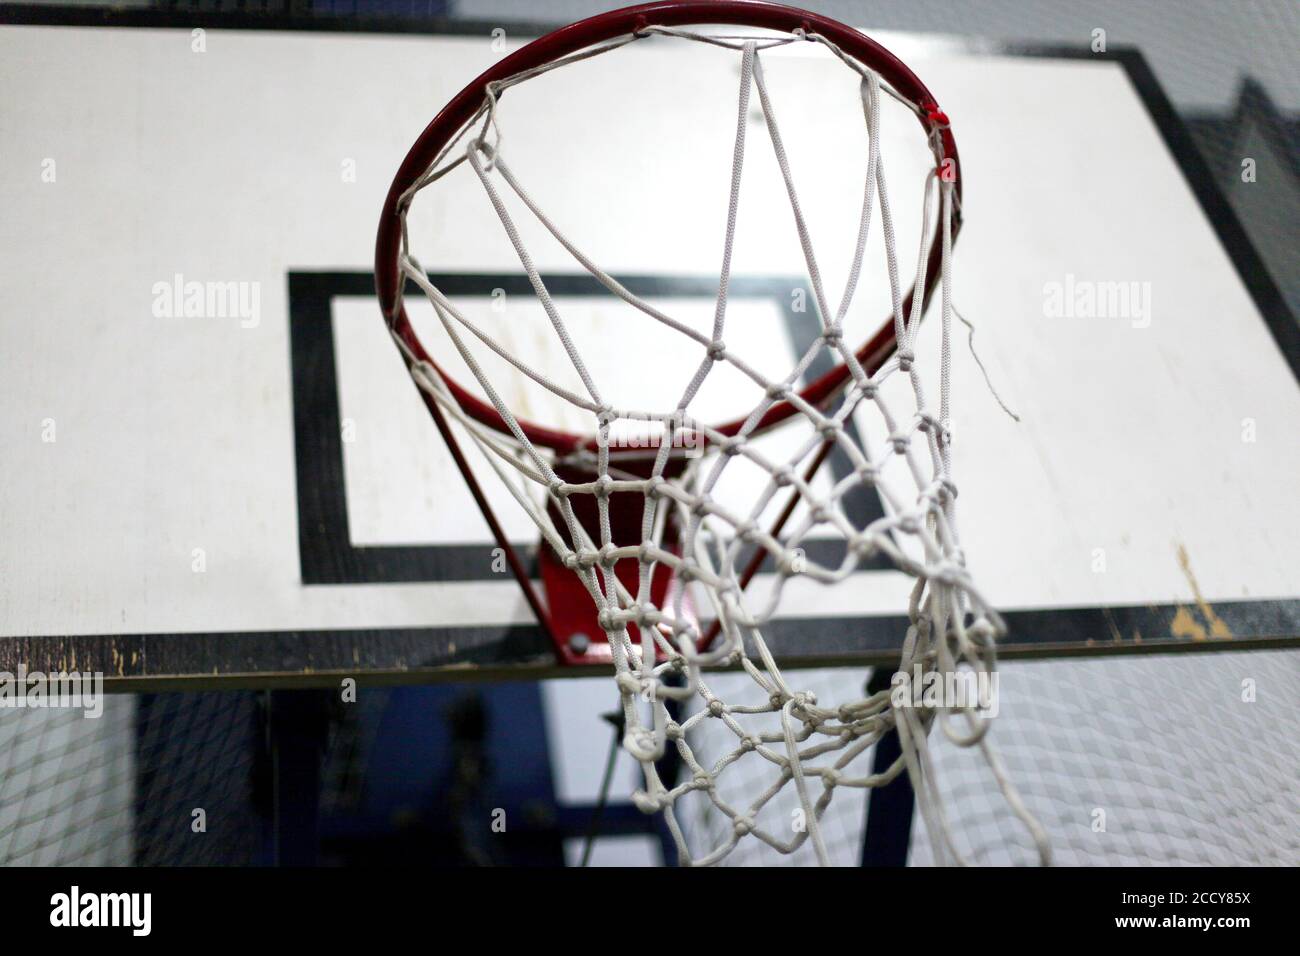 Basketball ring with a net for playing basketball indoors Stock Photo